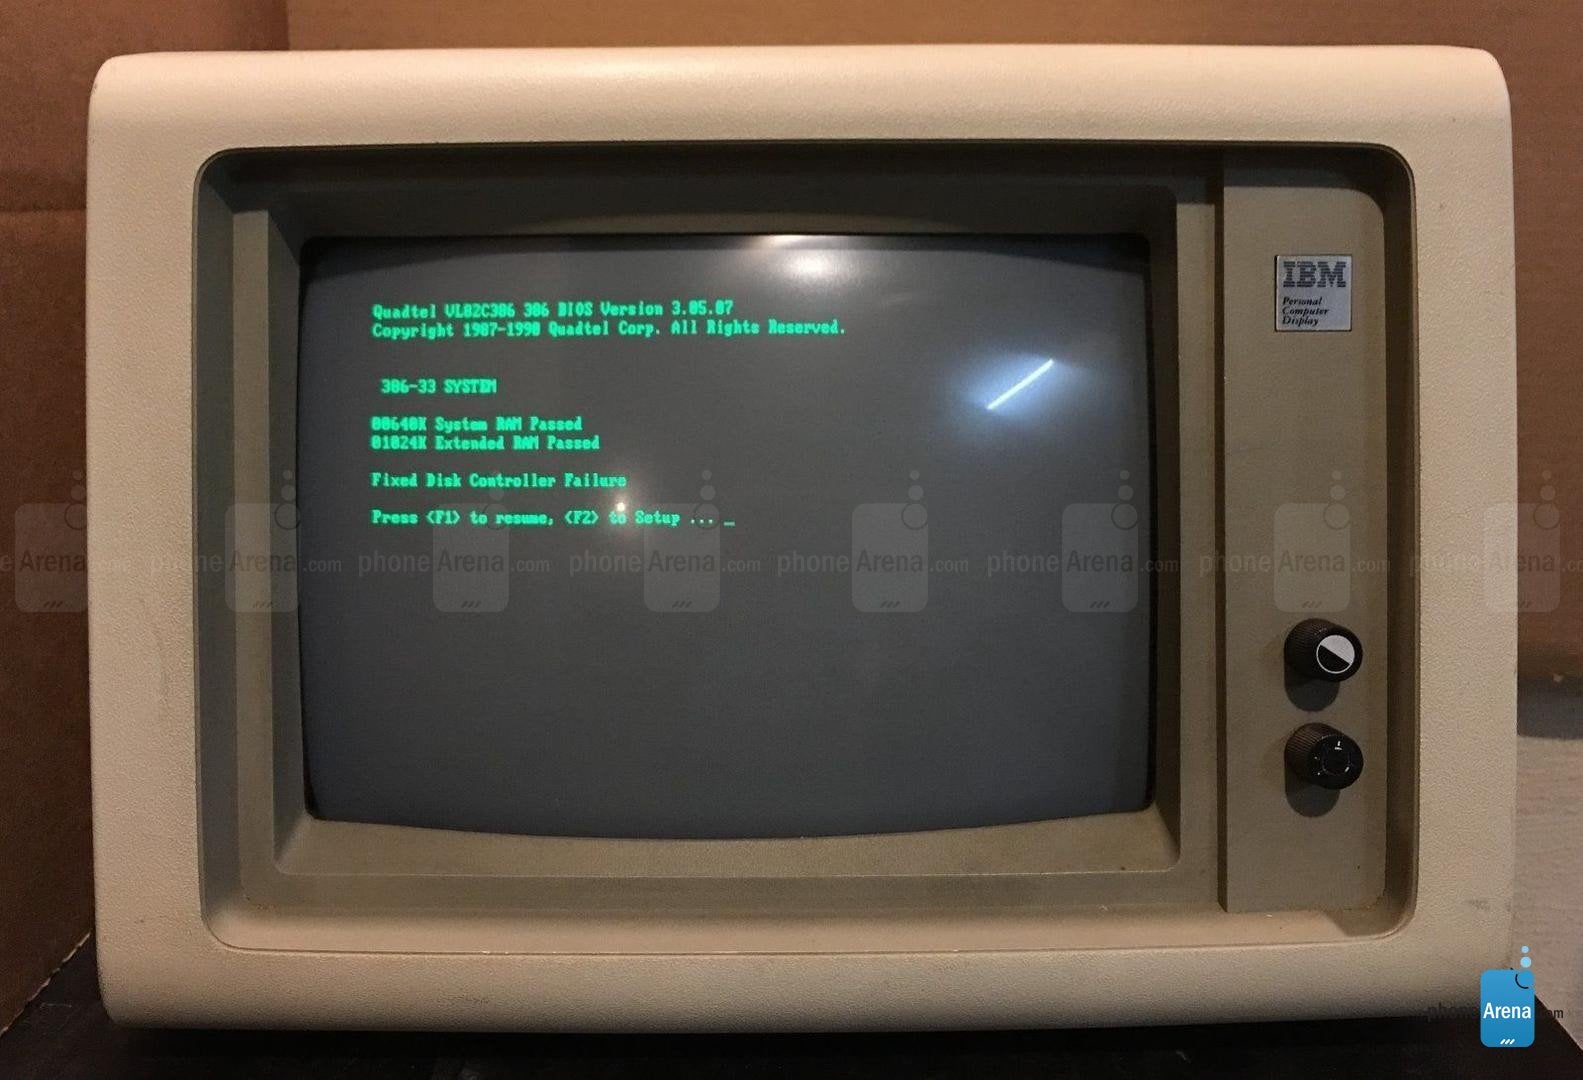 Dark mode nostalgia - IBM 5151 monochrome monitor - The pros and cons of Dark Mode: Here's when to use it and why